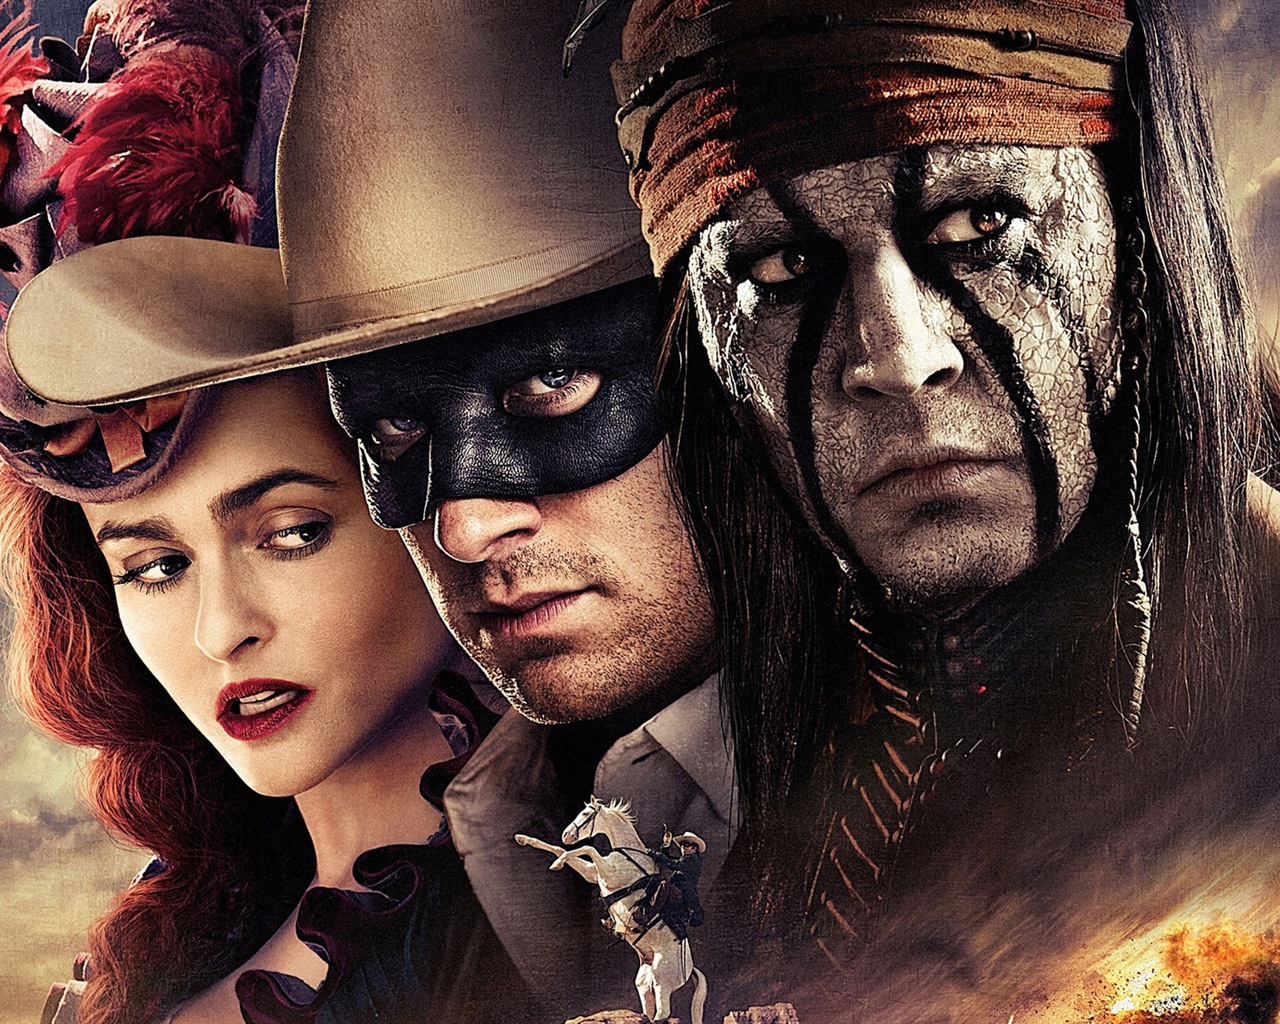 The Lone Ranger HD movie wallpapers #1 - 1280x1024